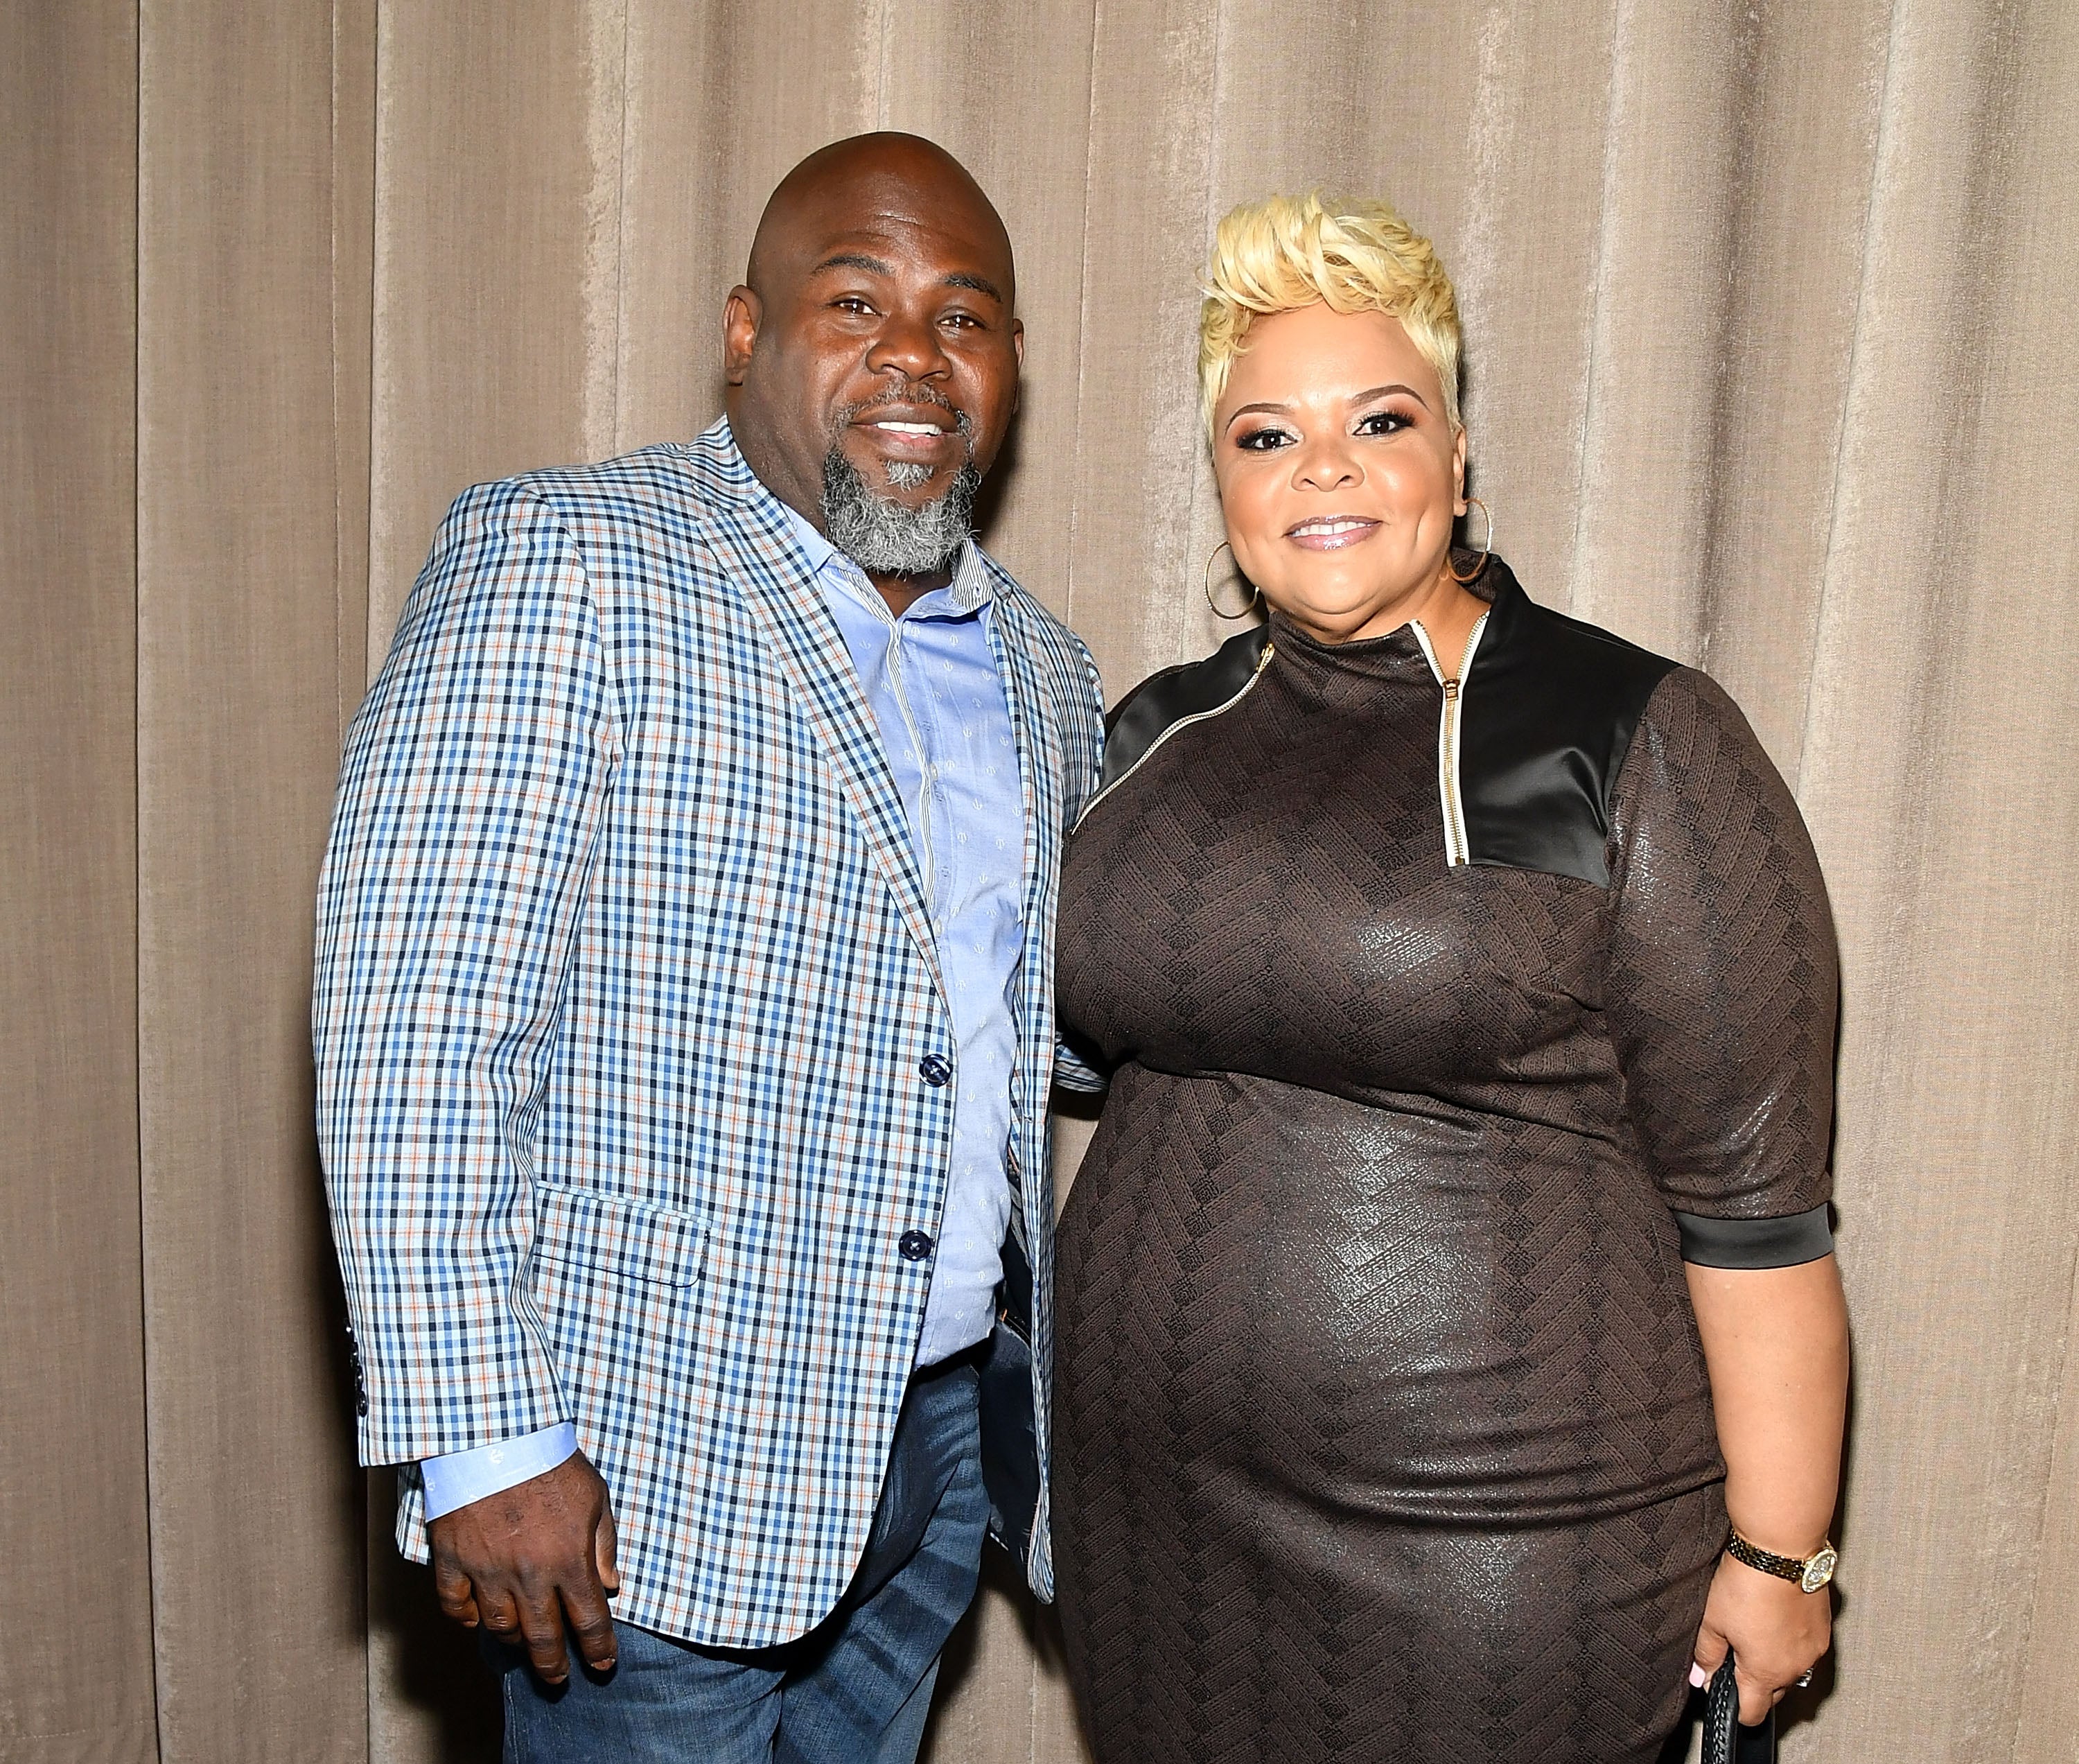 Happy Anniversary! David And Tamela Mann Celebrate 29 Years Of Marriage